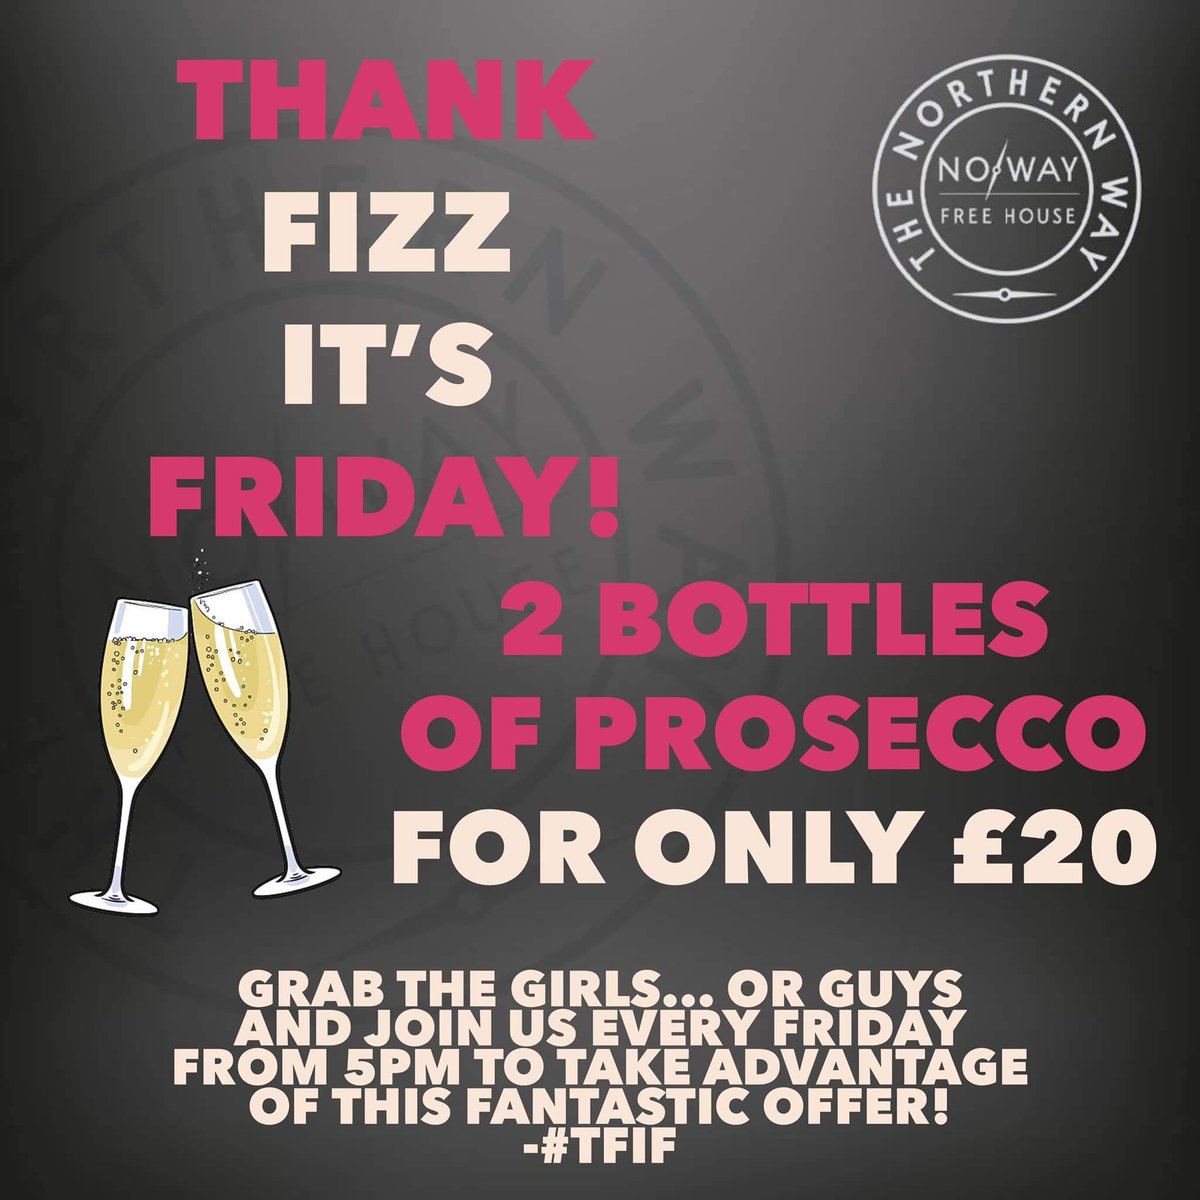 🥂 Thank FIZZ it’s FRIDAY!

🍾🍾 TWO bottles of Prosecco for only £20 from 5pm!

#FizzFriday #TFIF #Preston